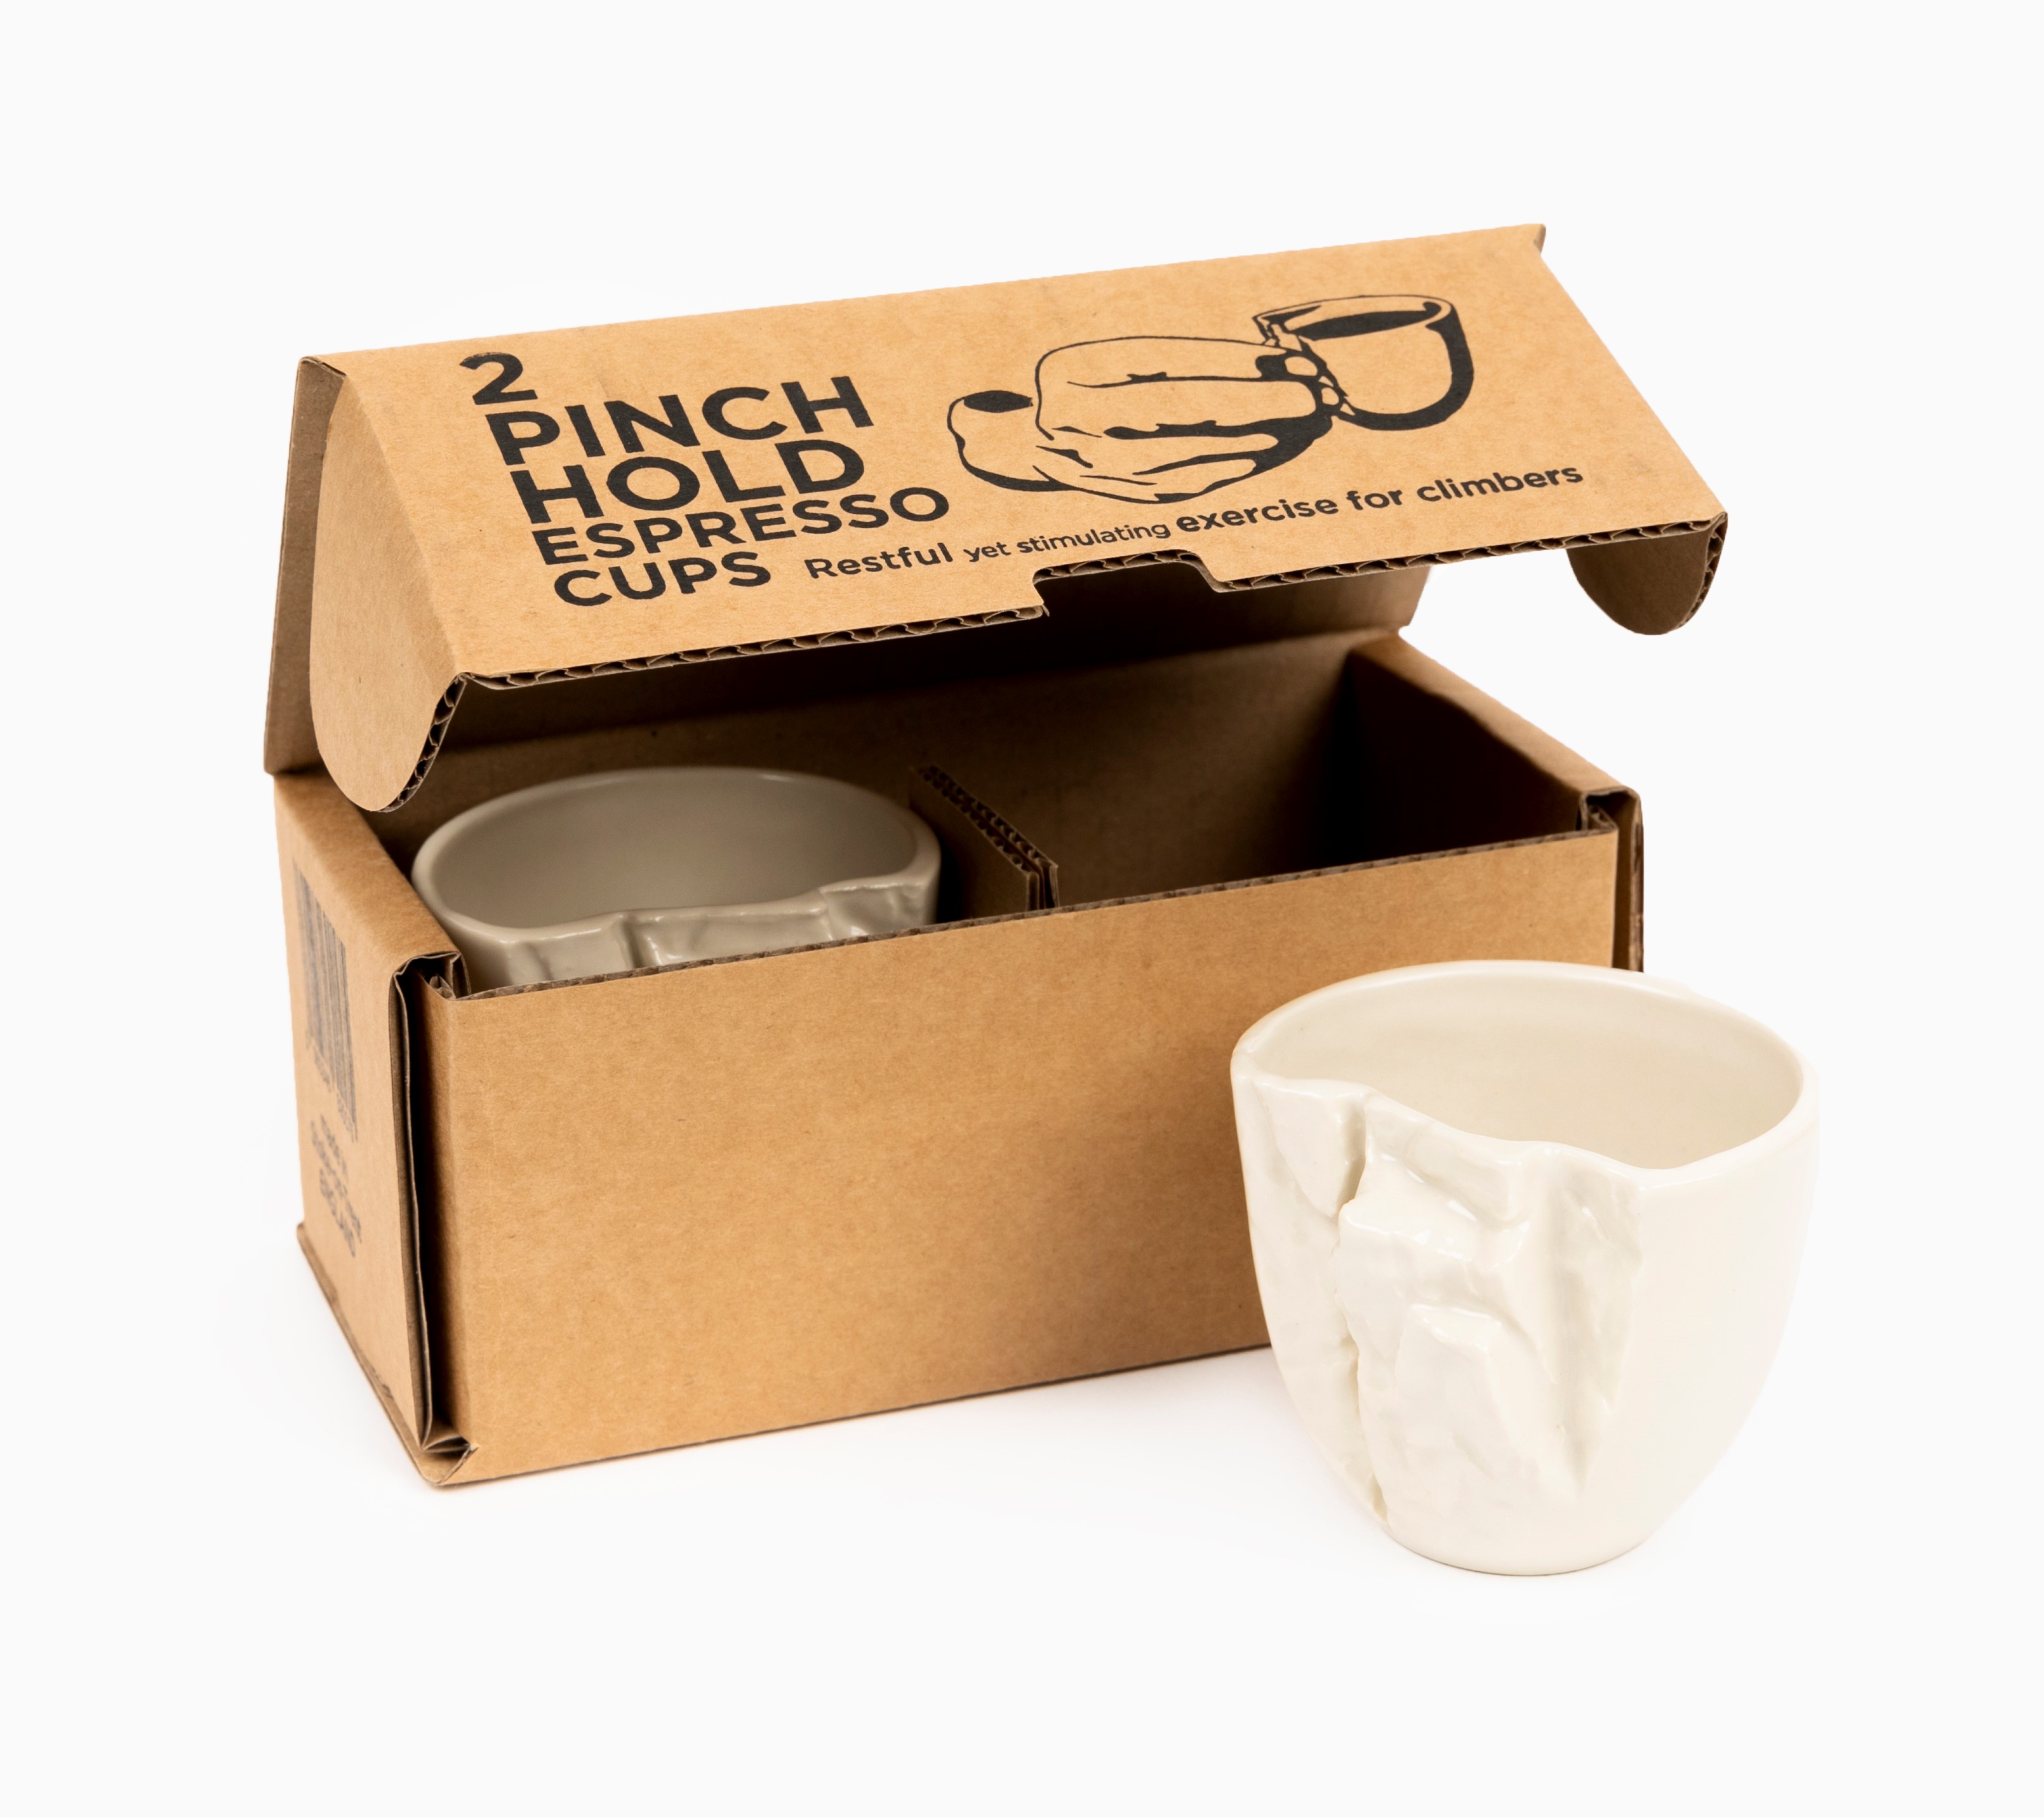 Pinch Hold Espresso Cups - The Perfect Christmas Gift for Coffee-Obsessed Rock Climbers